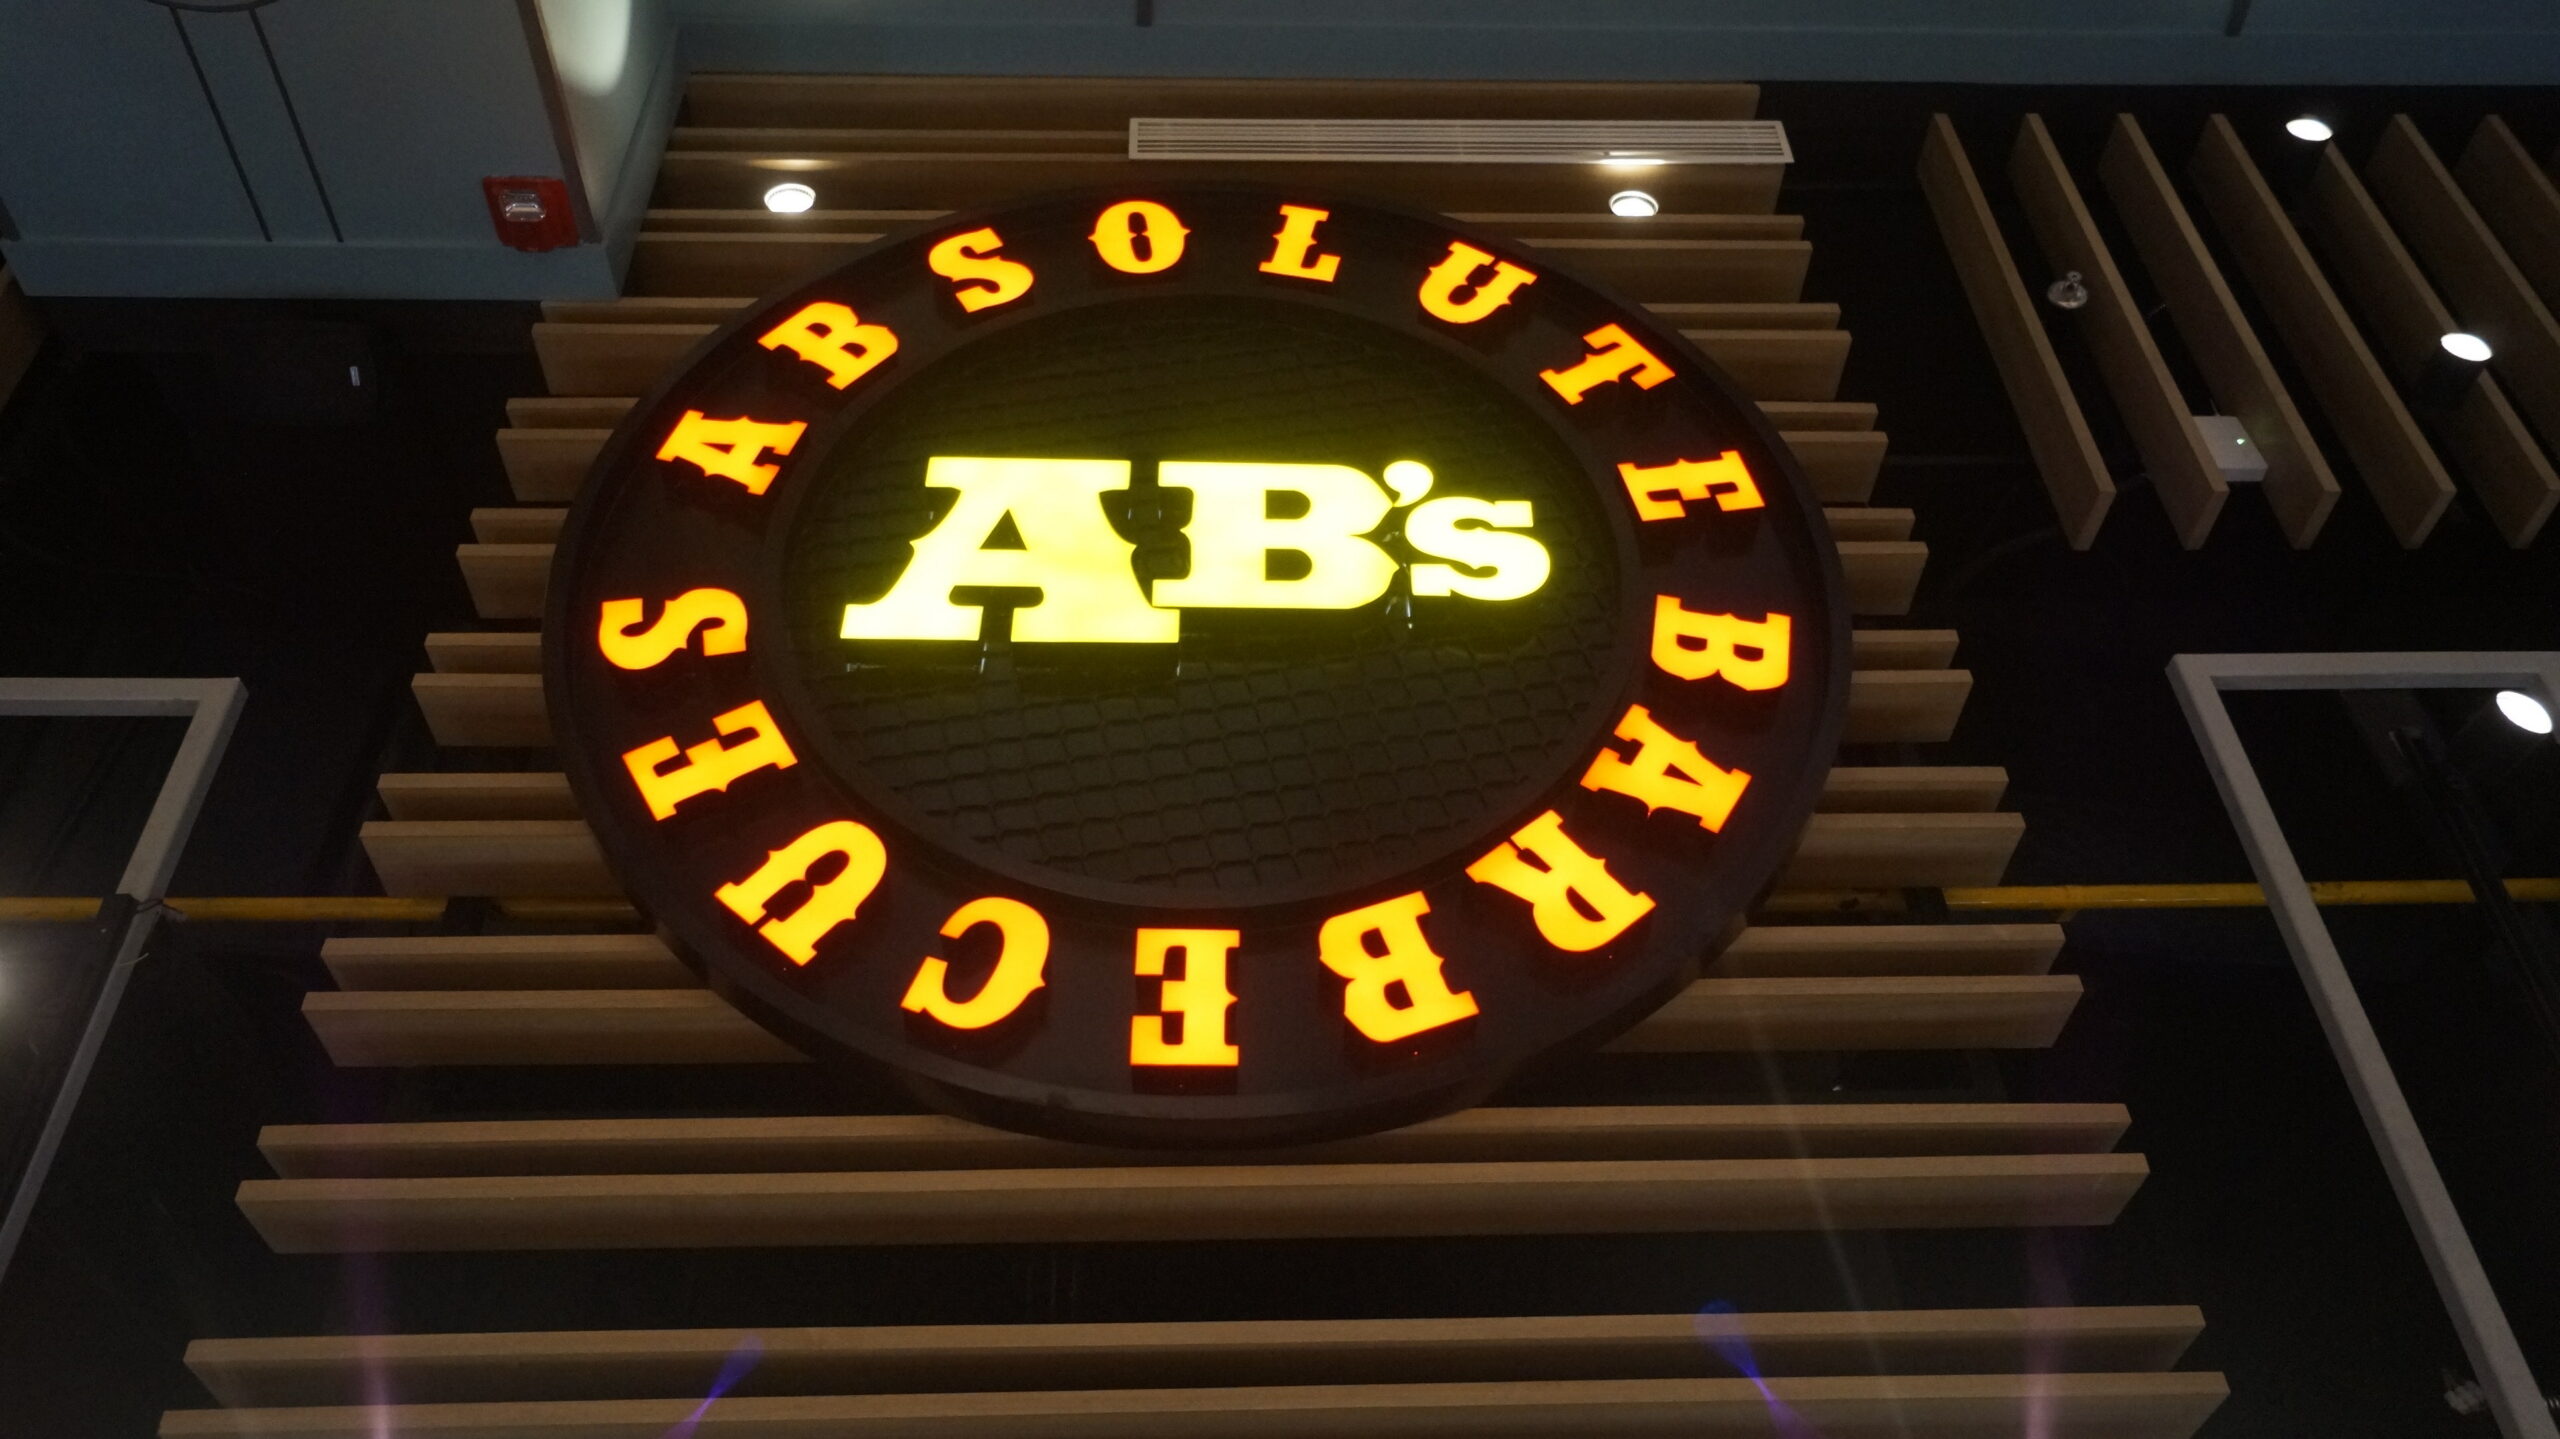 Absolute Barbecues  &#8211; AB&#8217;s, Next Musarambagh